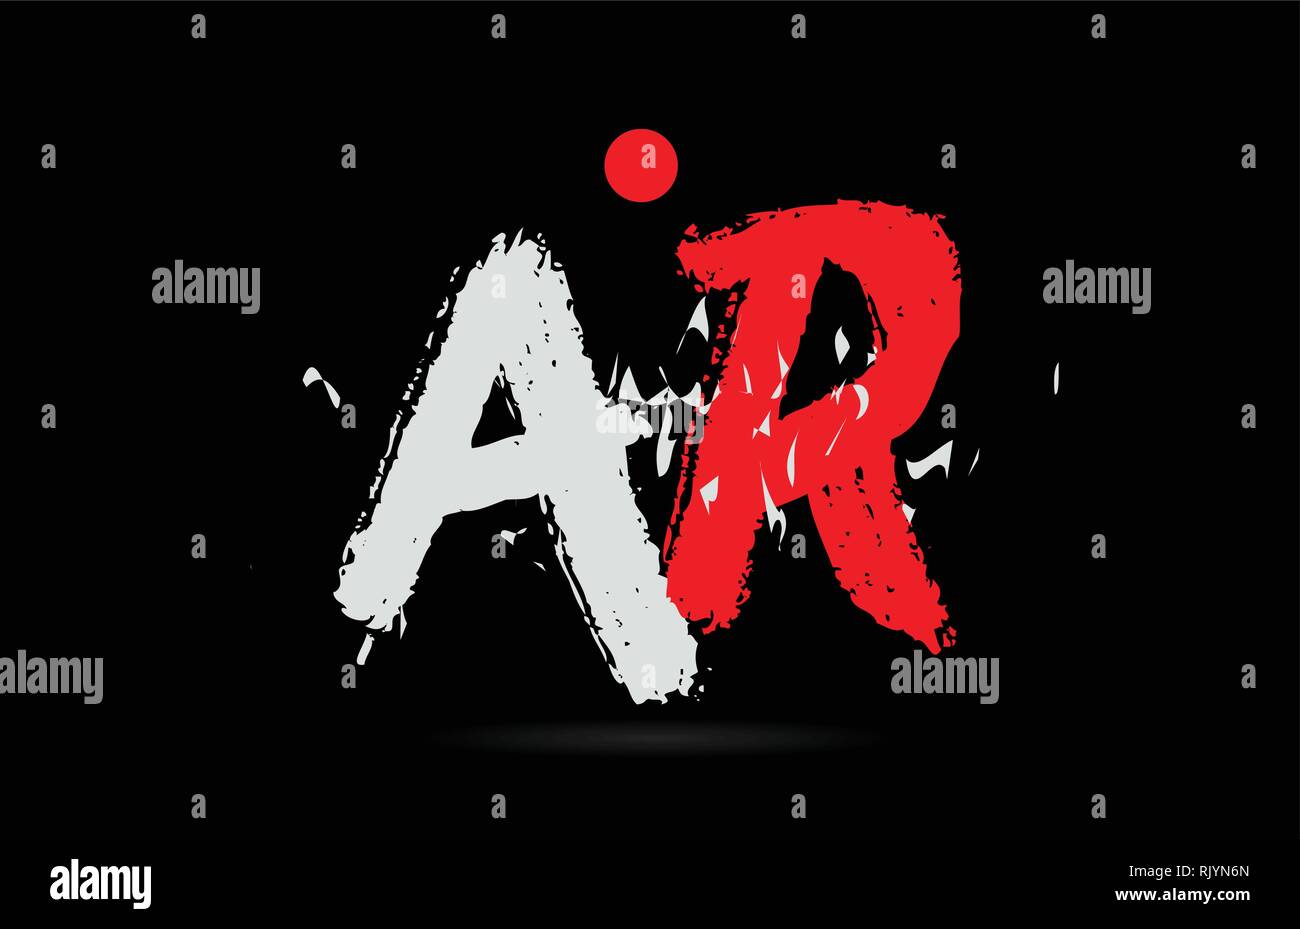 Design of alphabet letter combination AR A R on black background with grunge texture and white red color suitable as a logo for a company or business Stock Vector